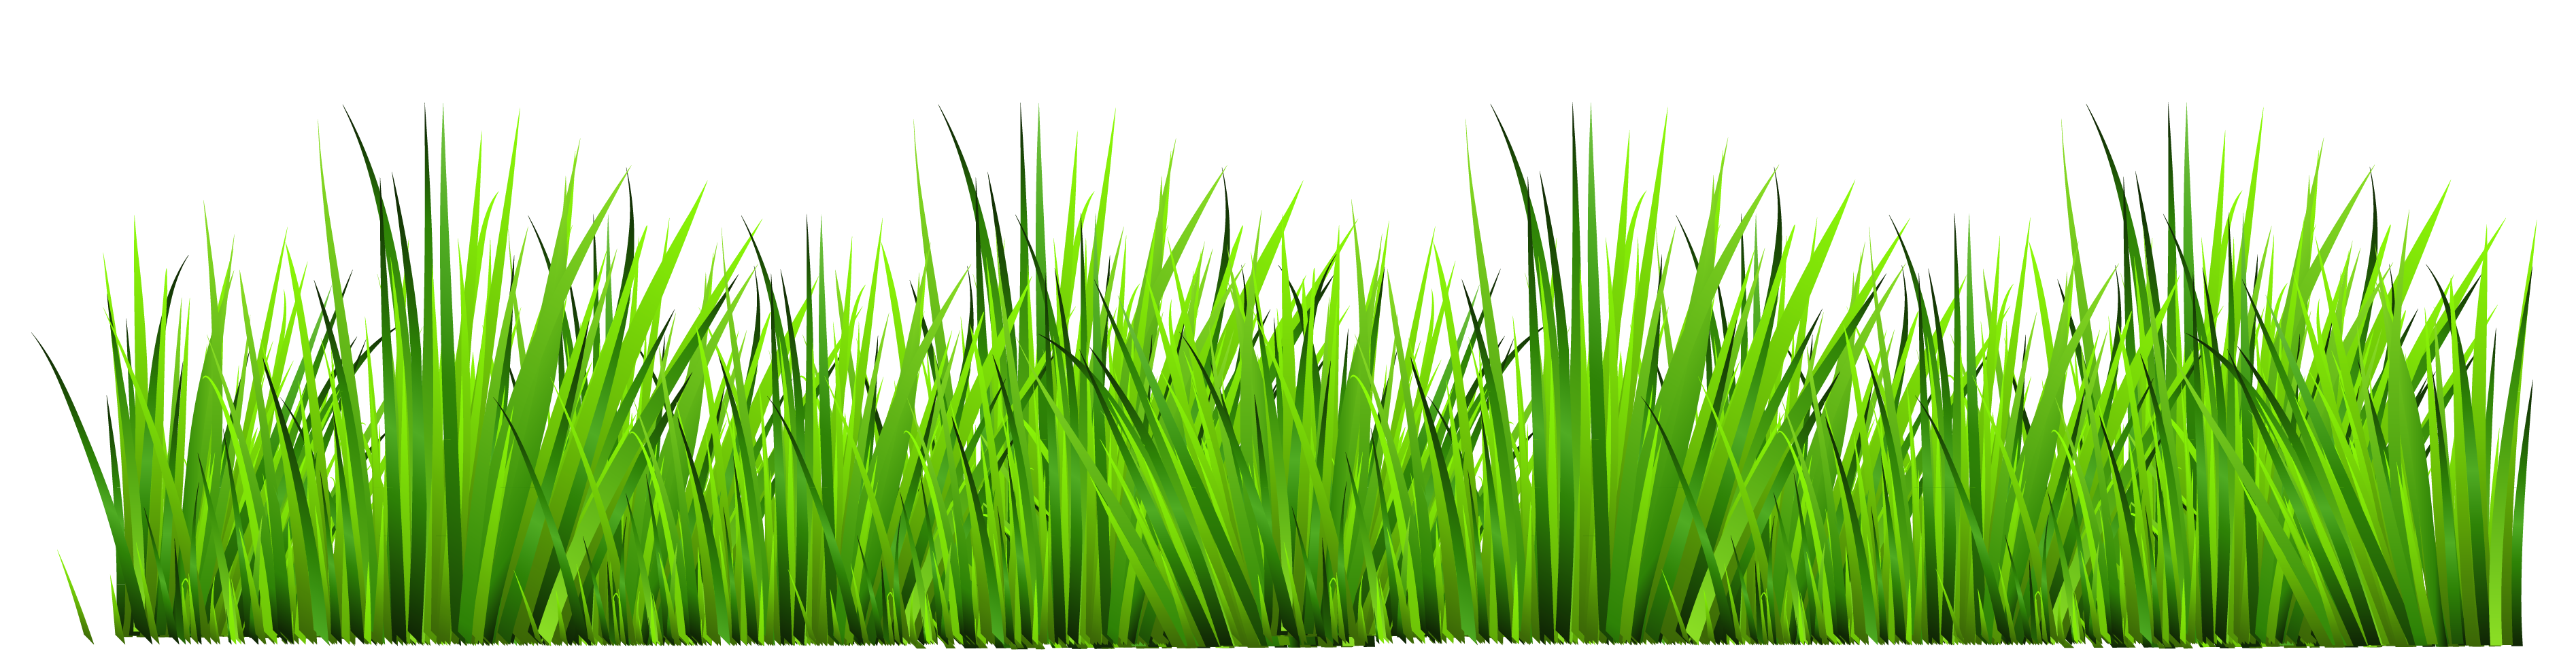 Grass Images Free Download Clipart